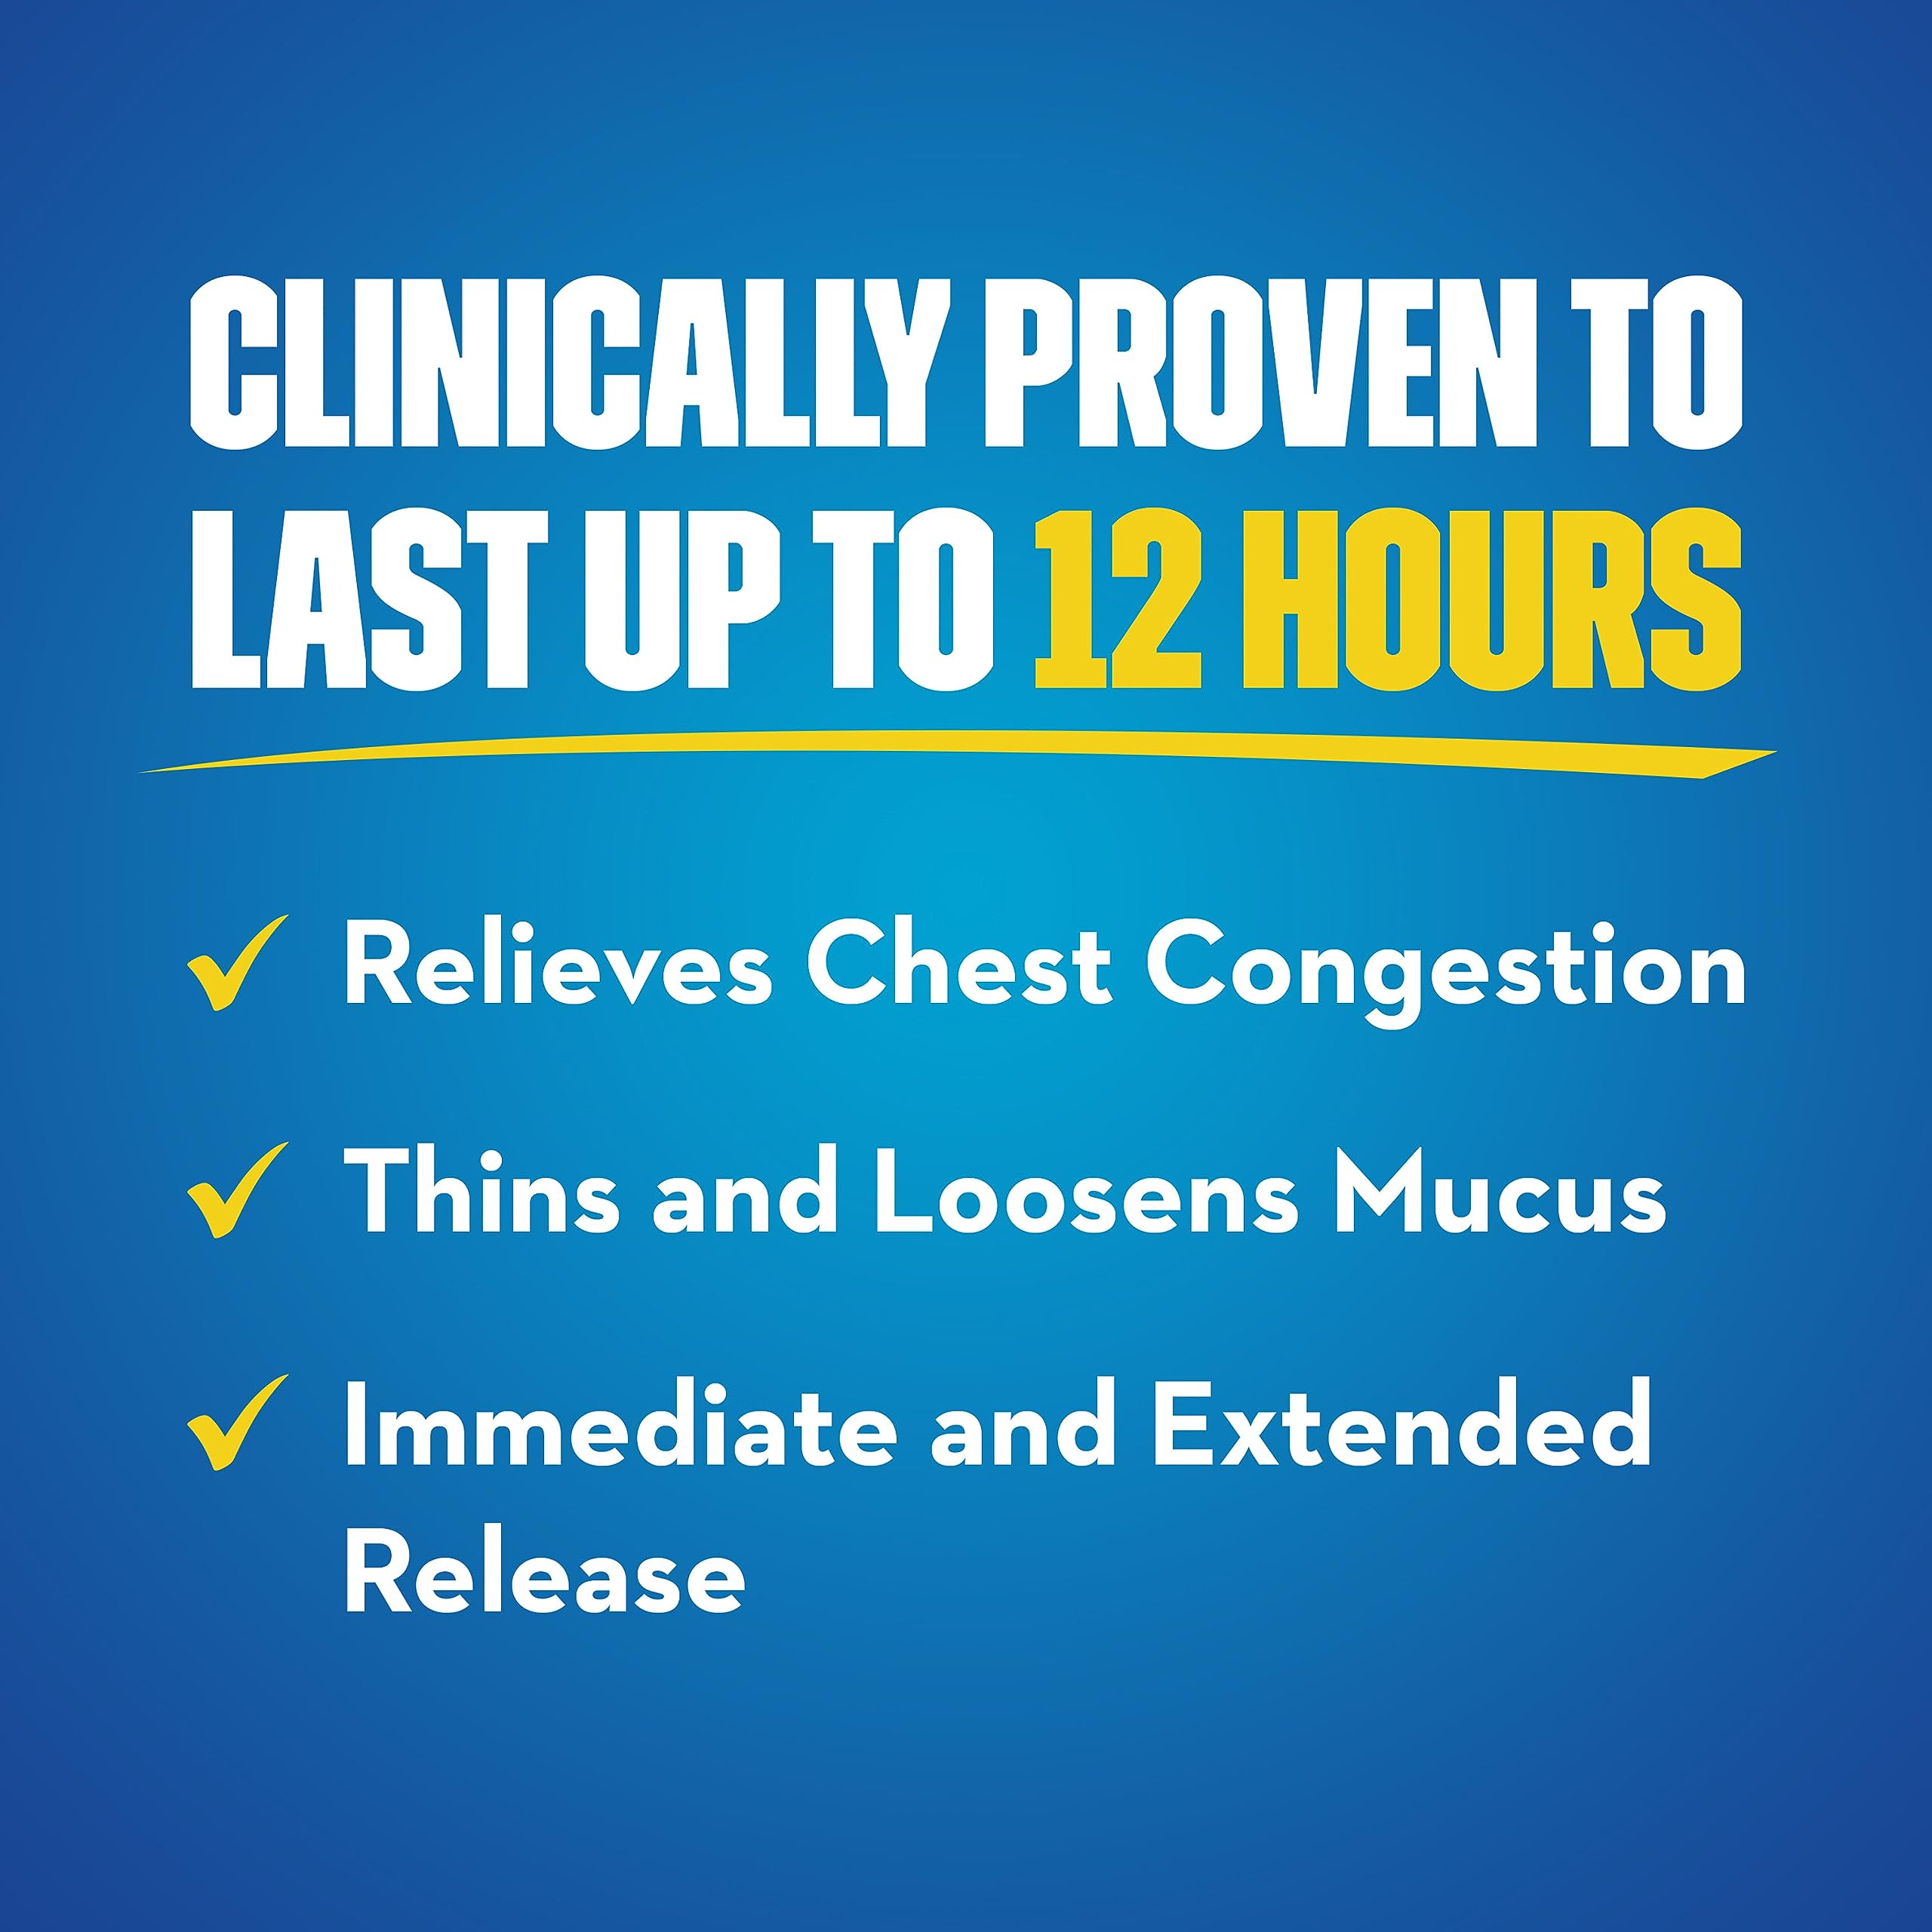 Chest Congestion, Mucinex 12 Hour Extended Release Tablets, 500 count bottle, 600 mg Guaifenesin Relieves Chest Congestion Caused by Excess Mucus, #1 Doctor Recommended OTC expectorant